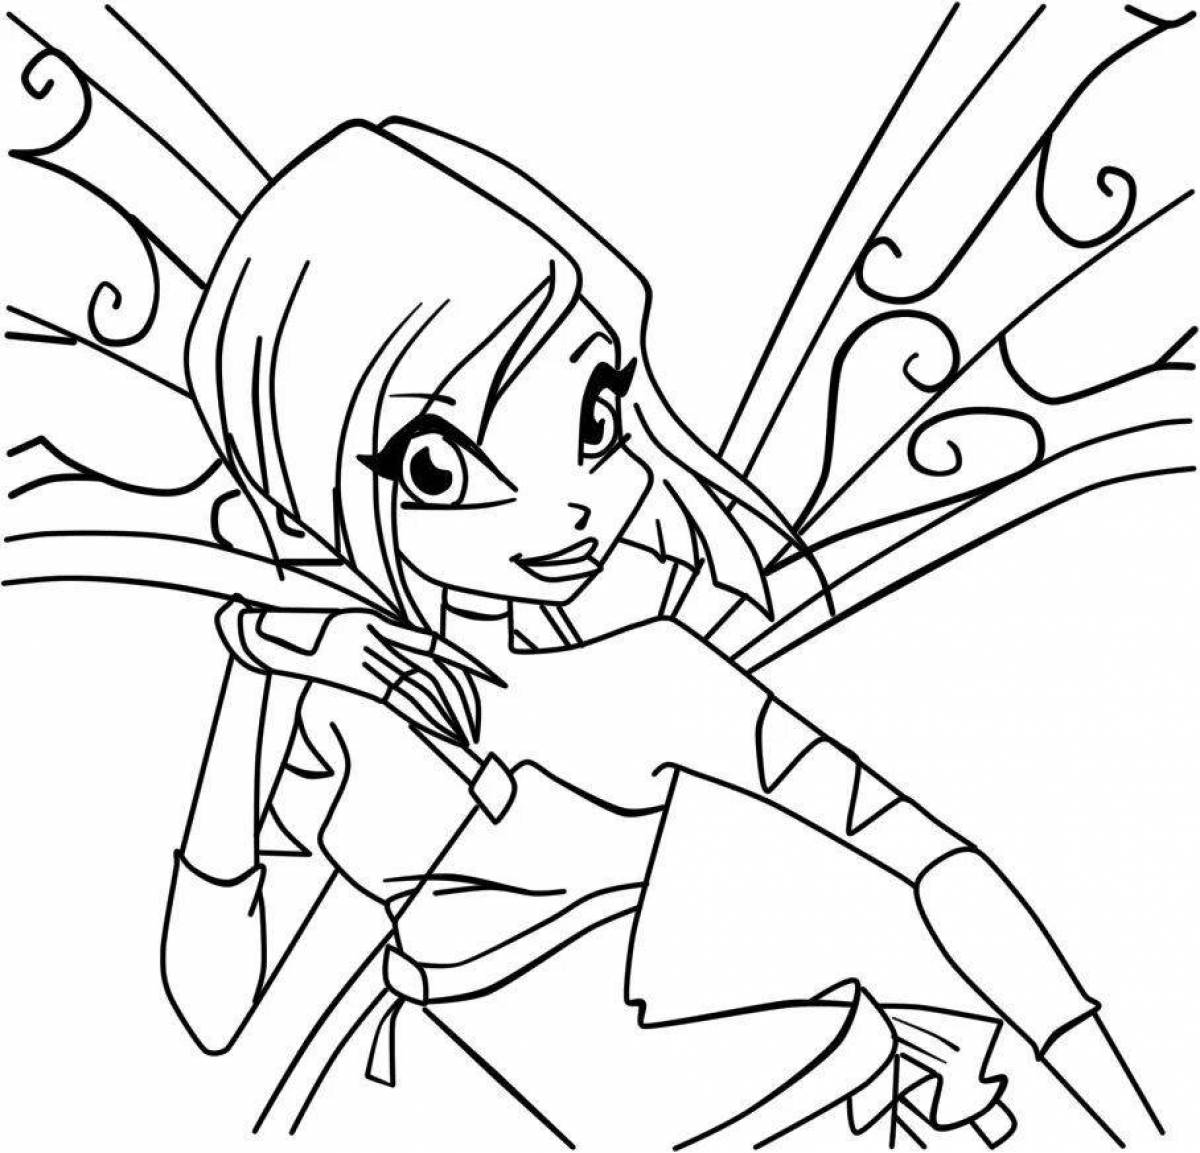 Exciting winx fairy coloring book for kids